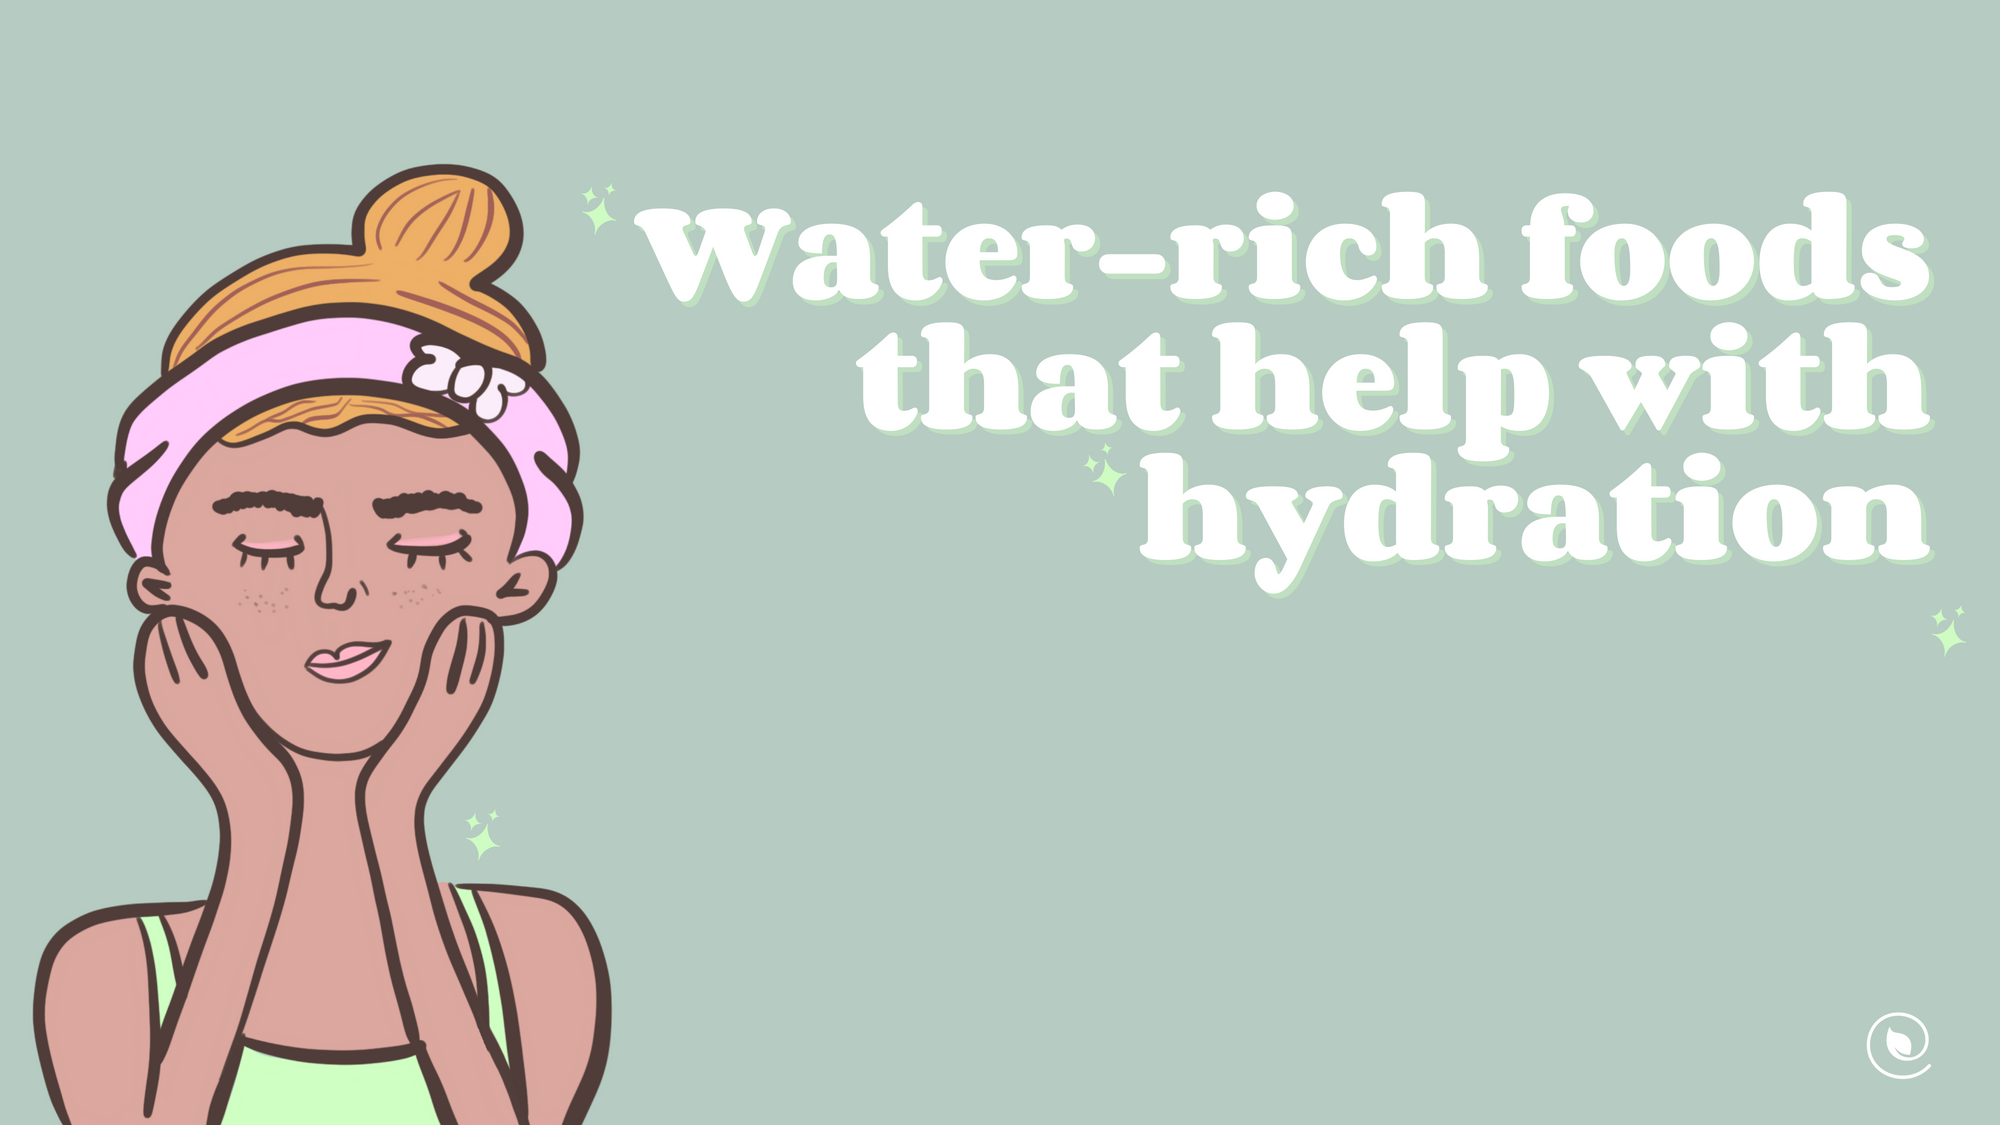 Water-rich foods that help with hydration